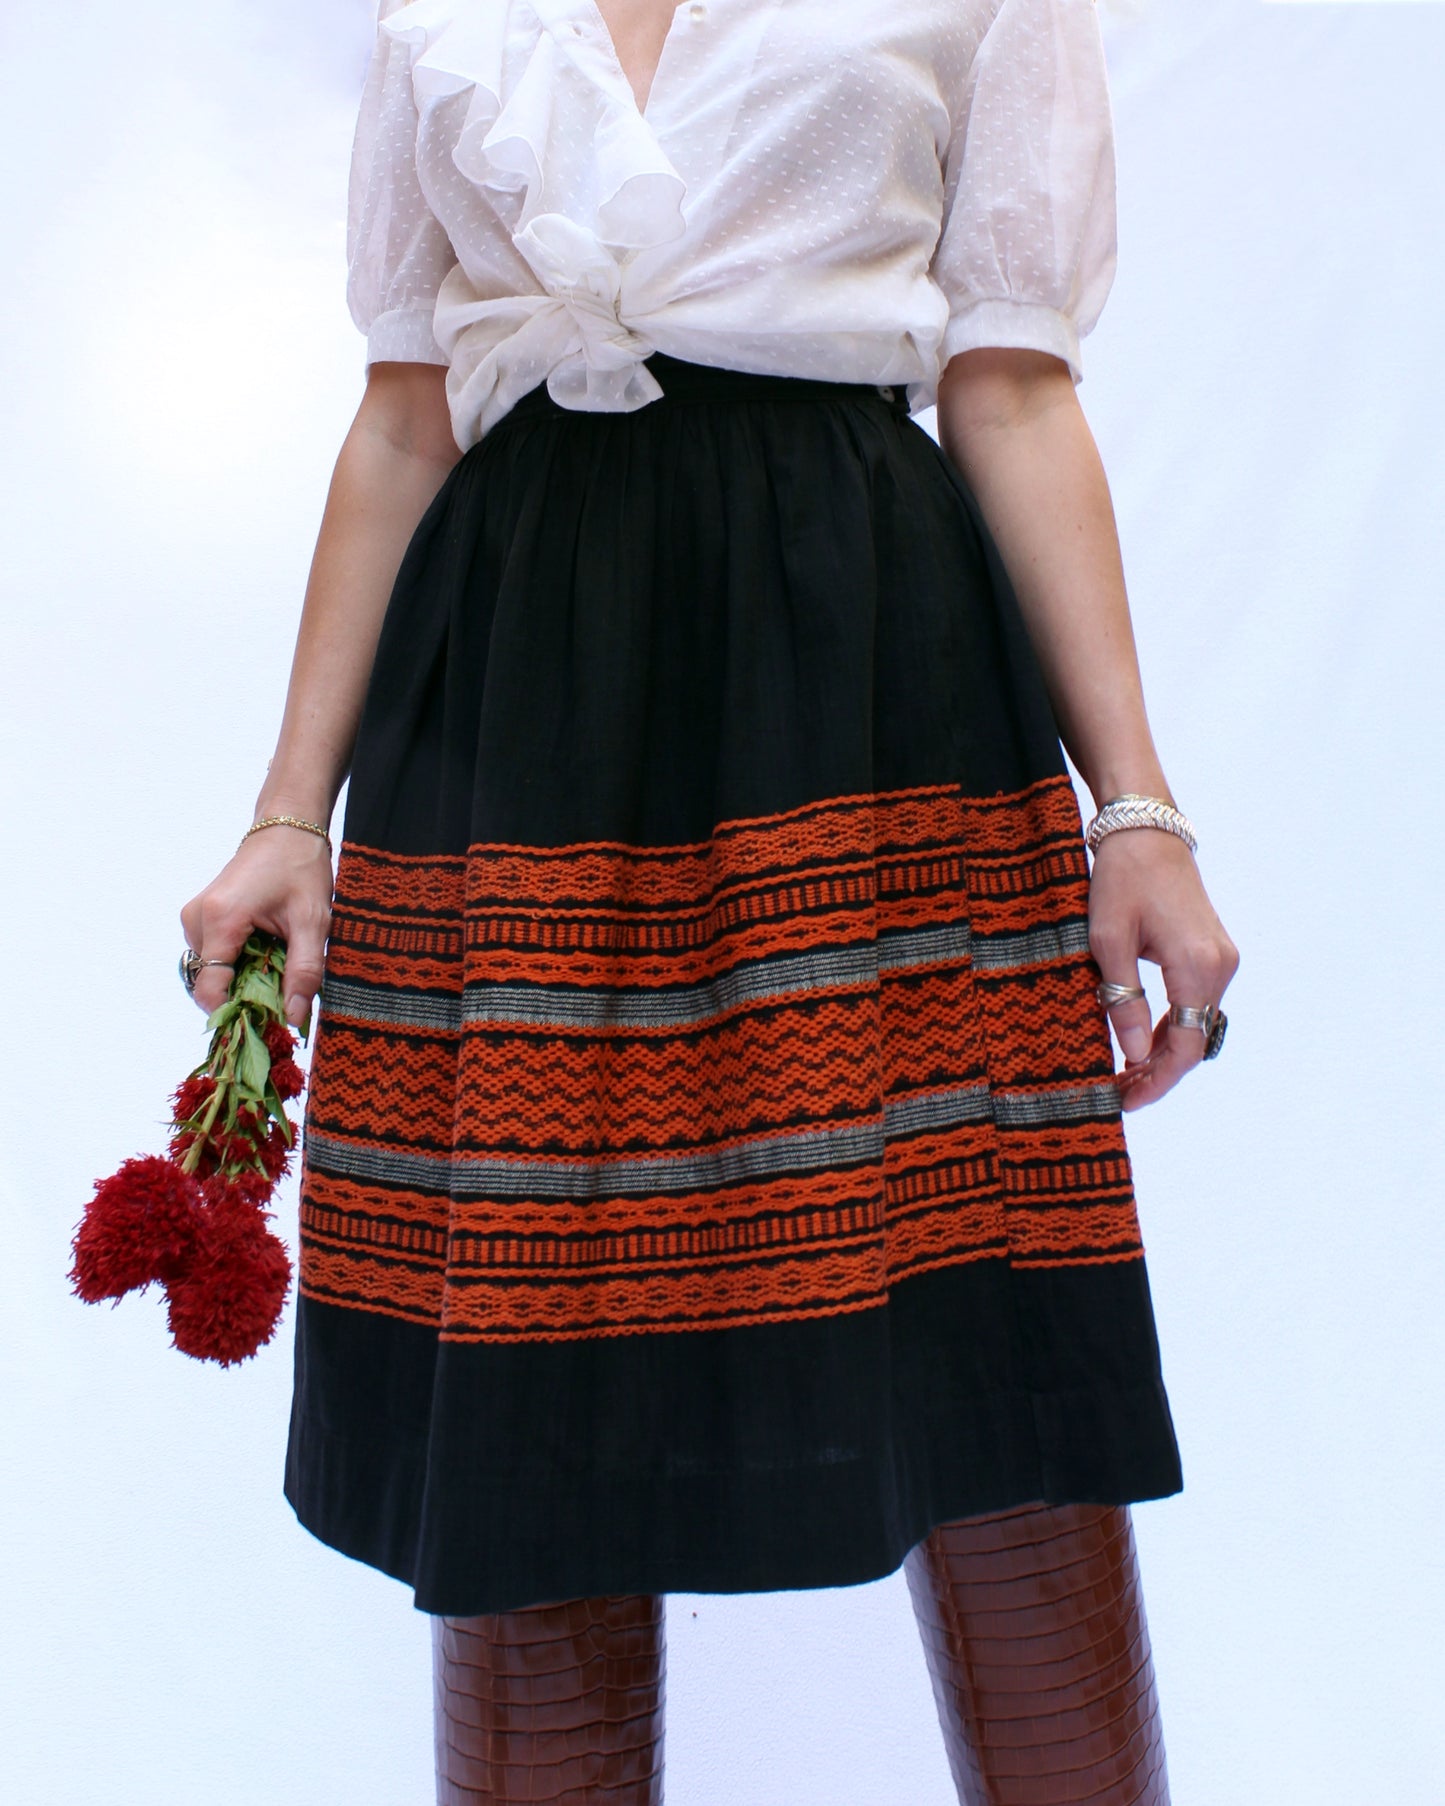 VINTAGE 1950s MEXICAN EMBROIDERED CIRCLE SKIRT